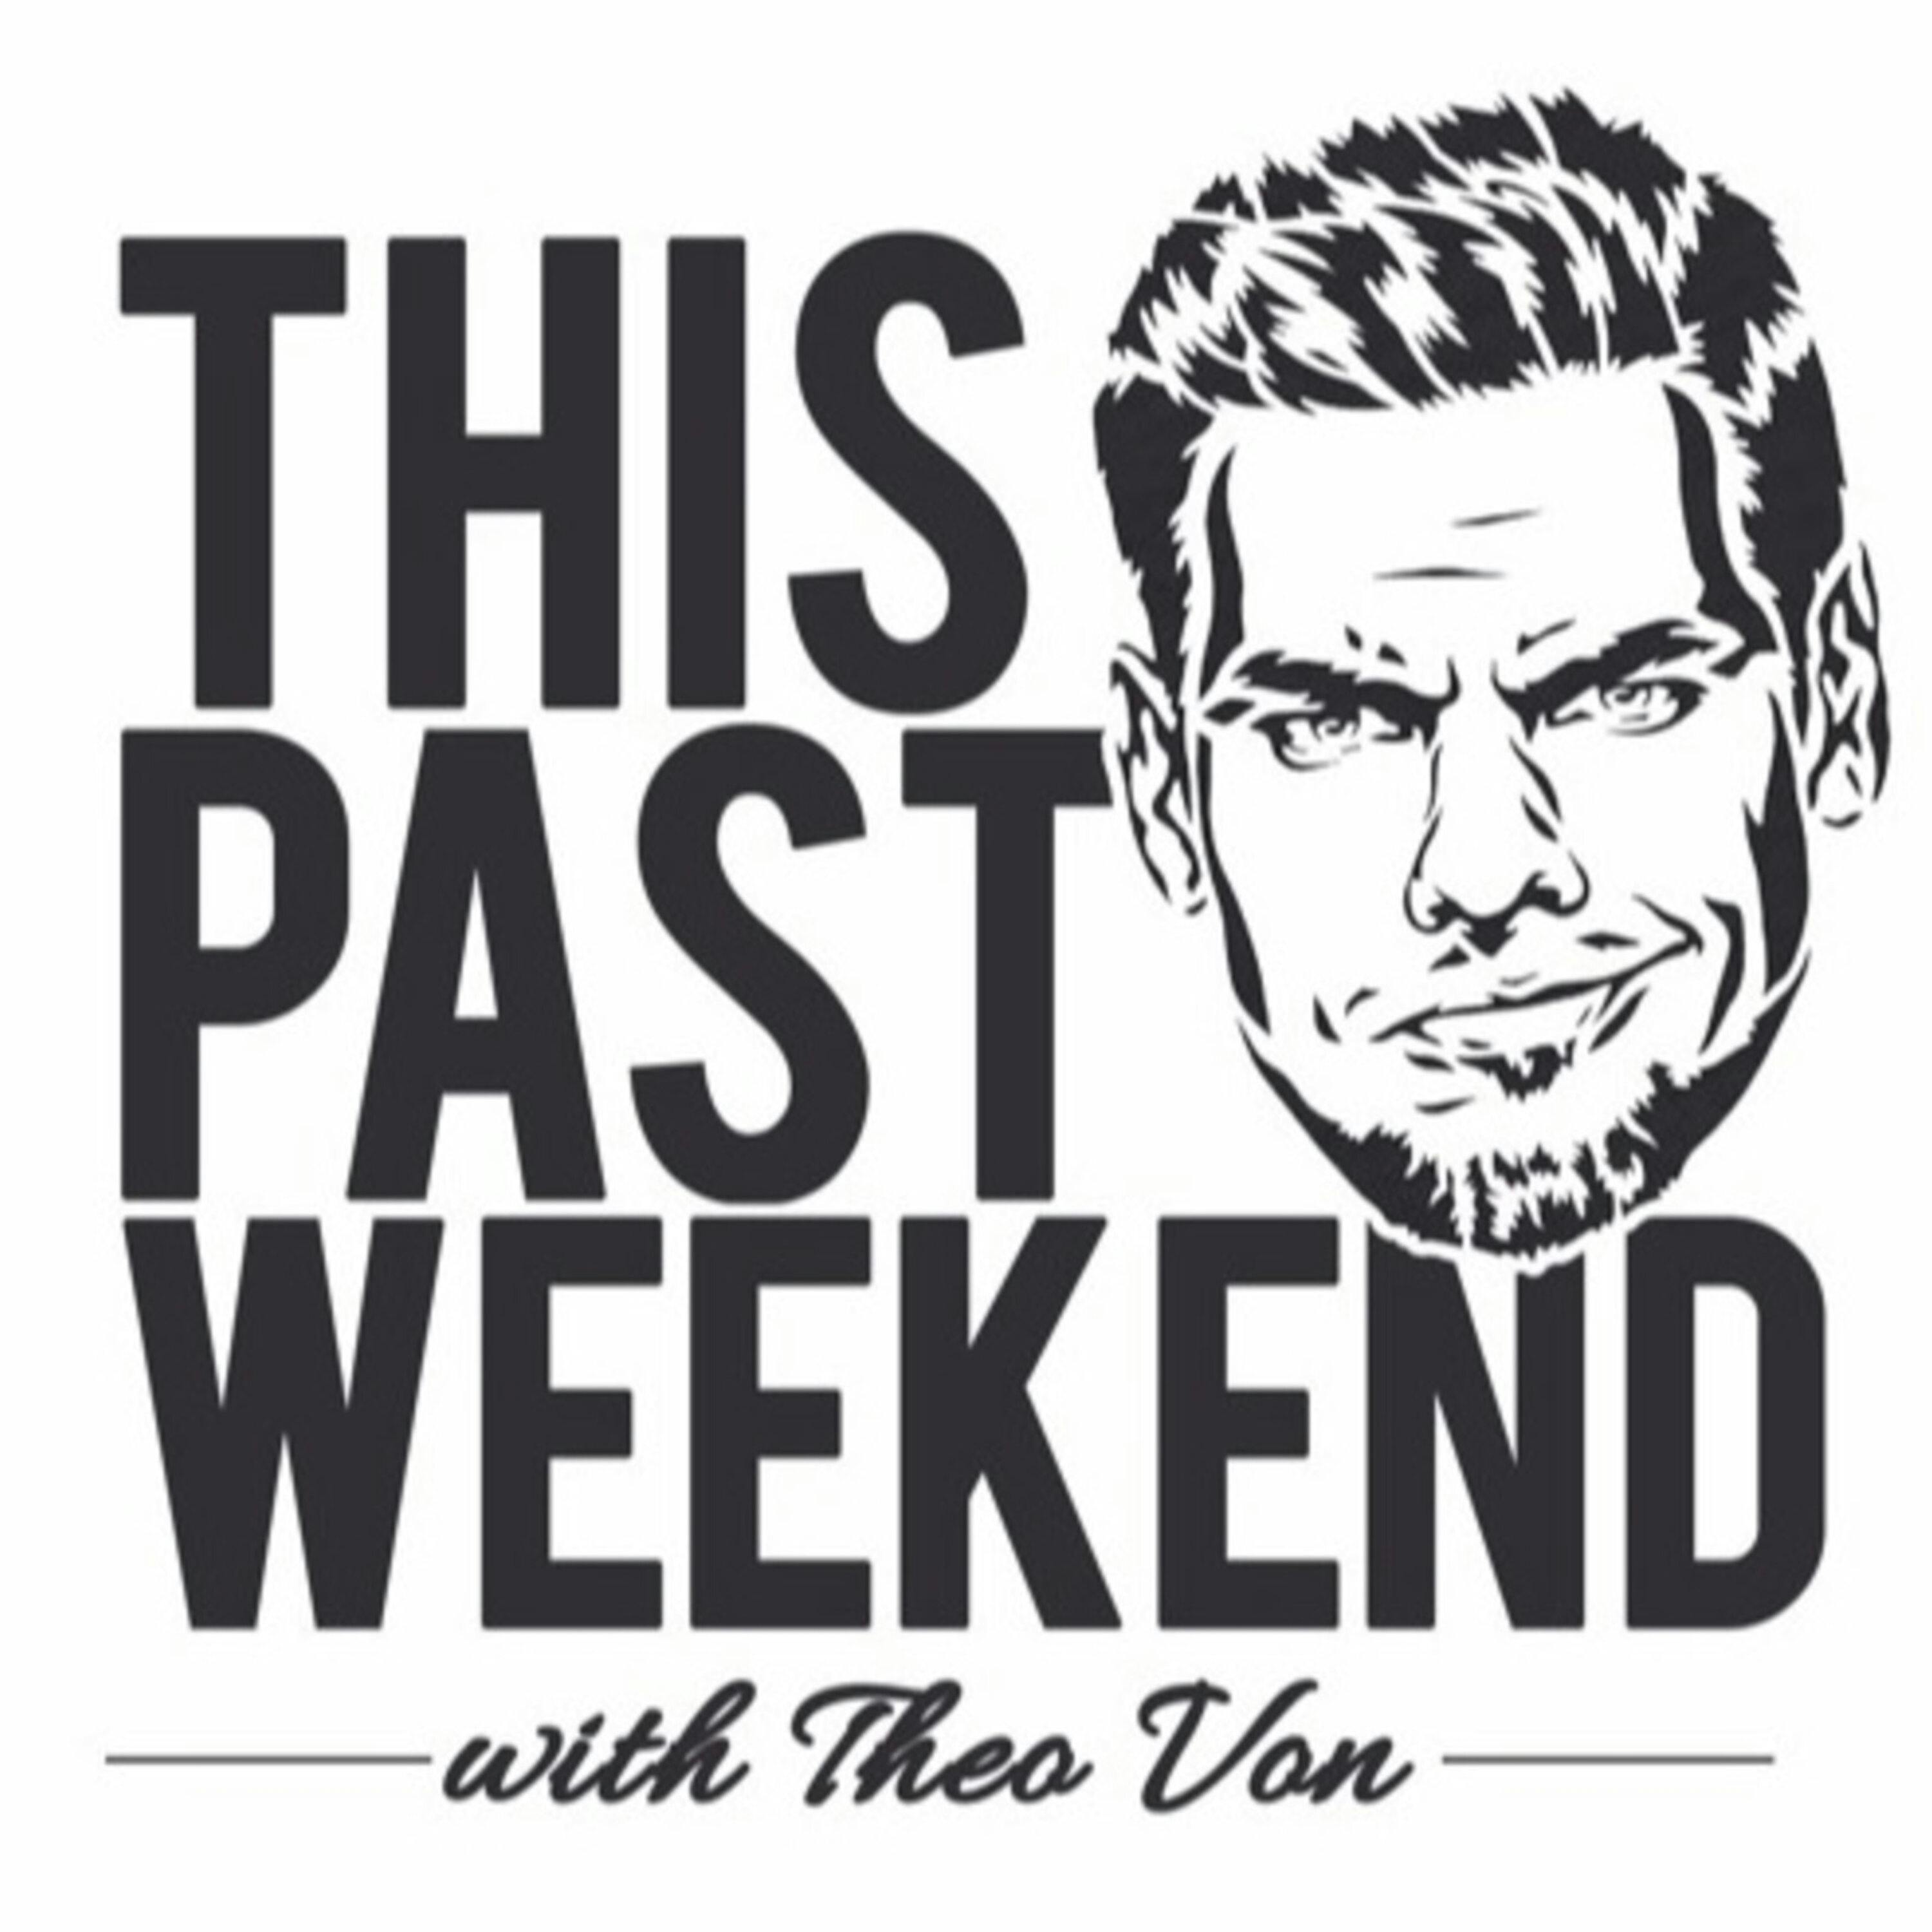 4-17-17 This Past Weekend #18 by Theo Von